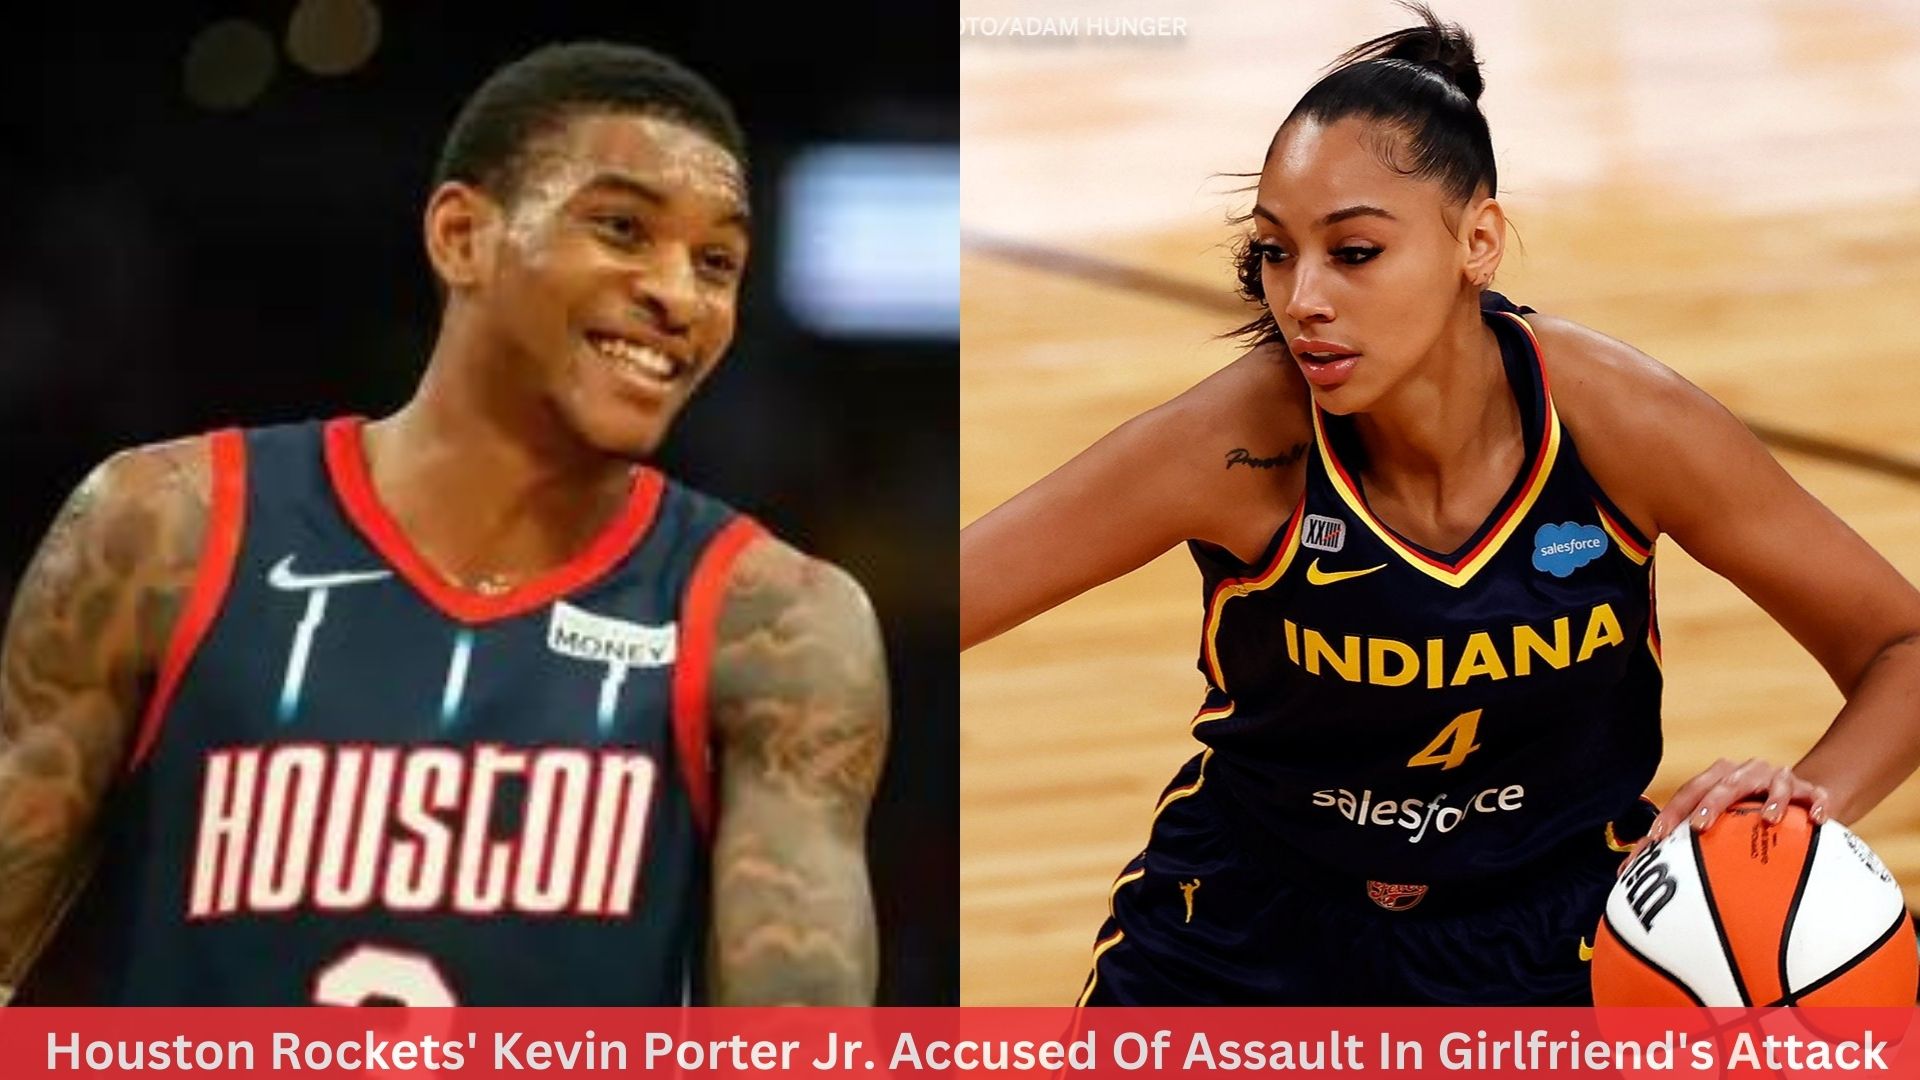 Houston Rockets' Kevin Porter Jr. Accused Of Assault In Girlfriend's Attack